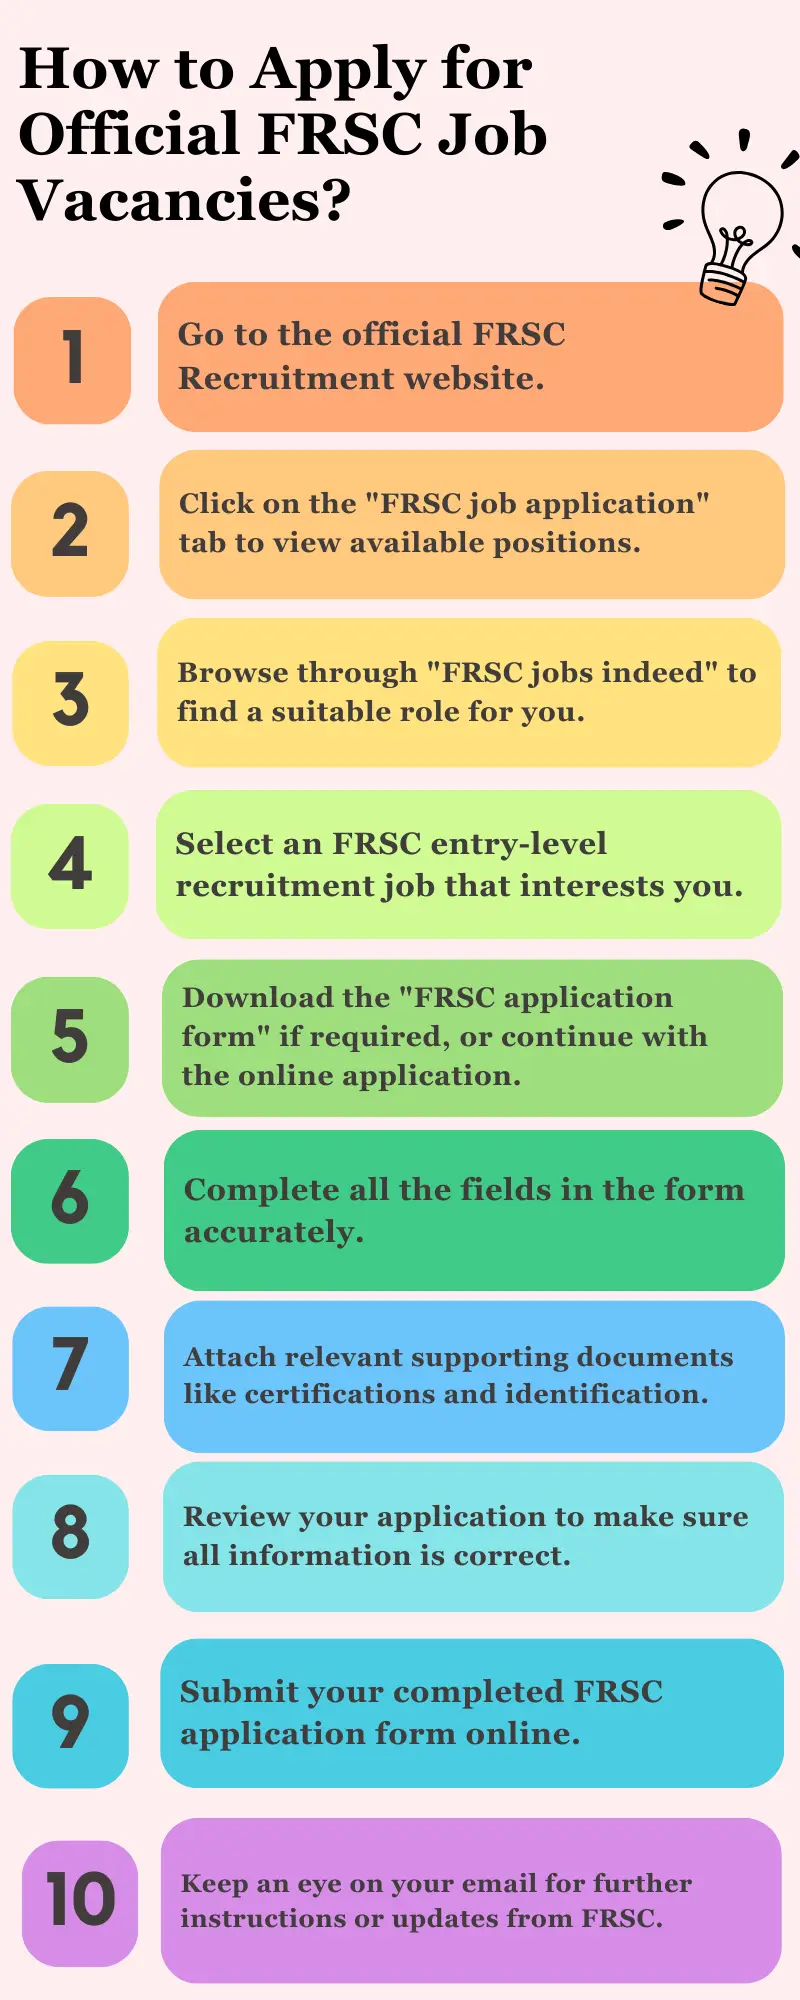 How to Apply for Official FRSC Job Vacancies?